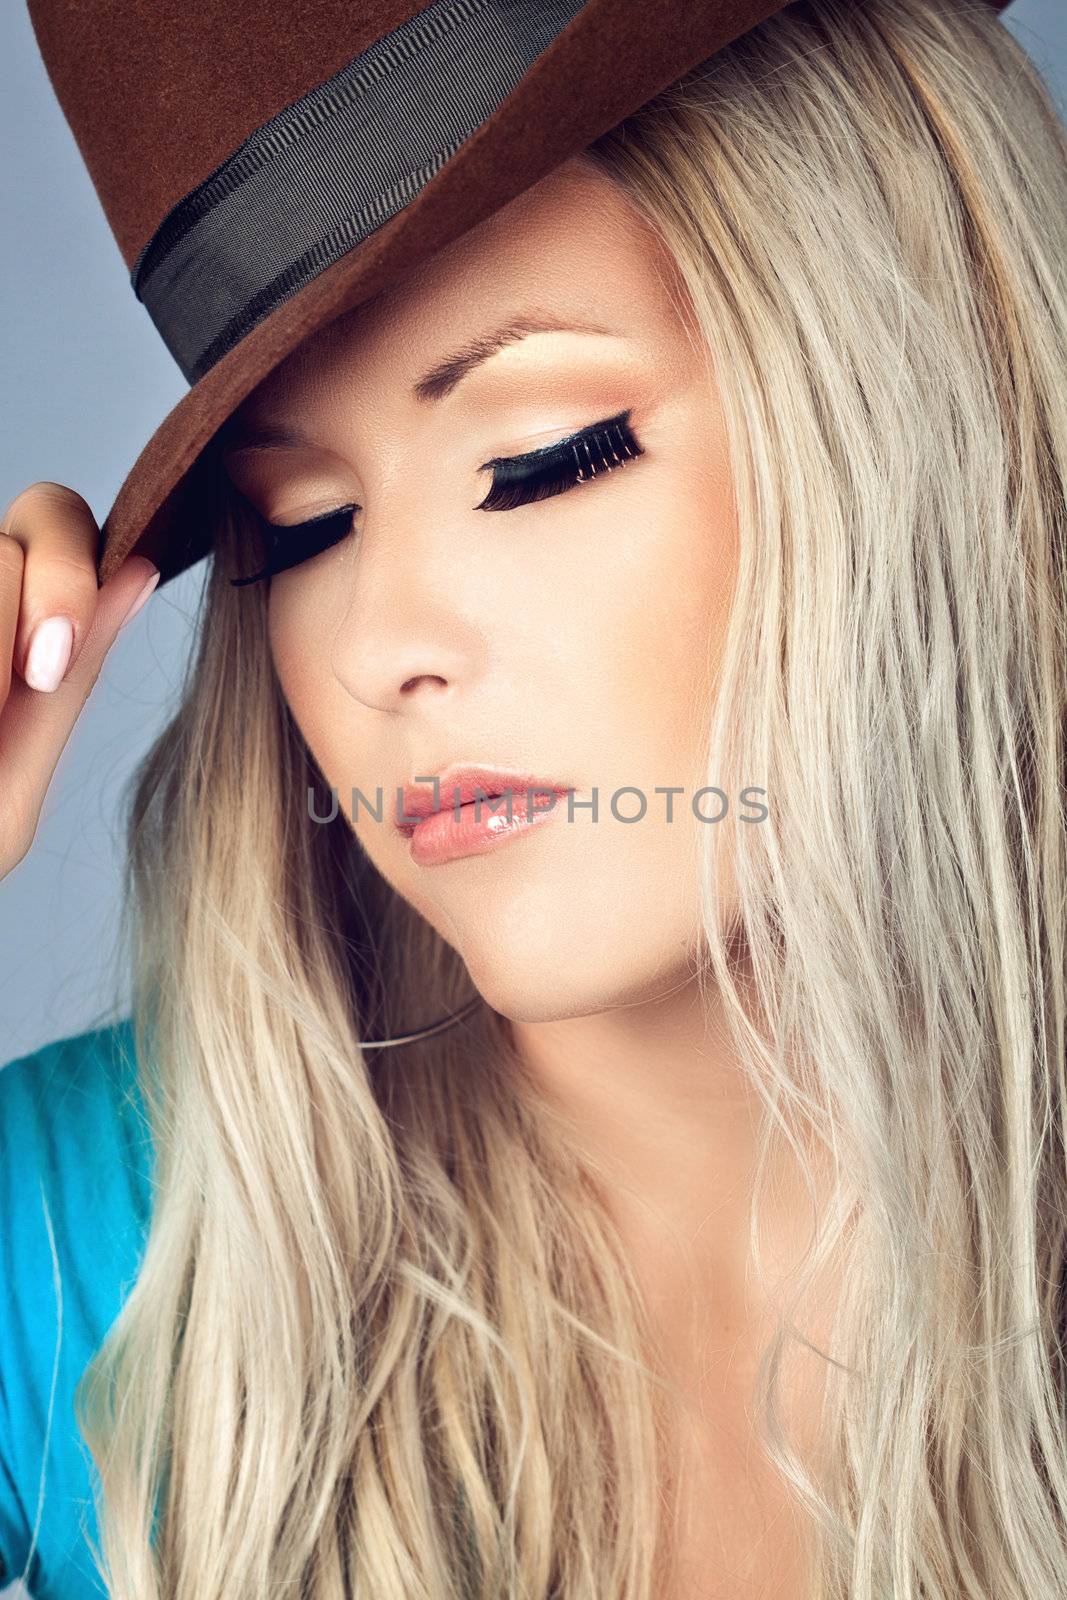 Portrait of a girl wearing a hat and have her eyes closed 